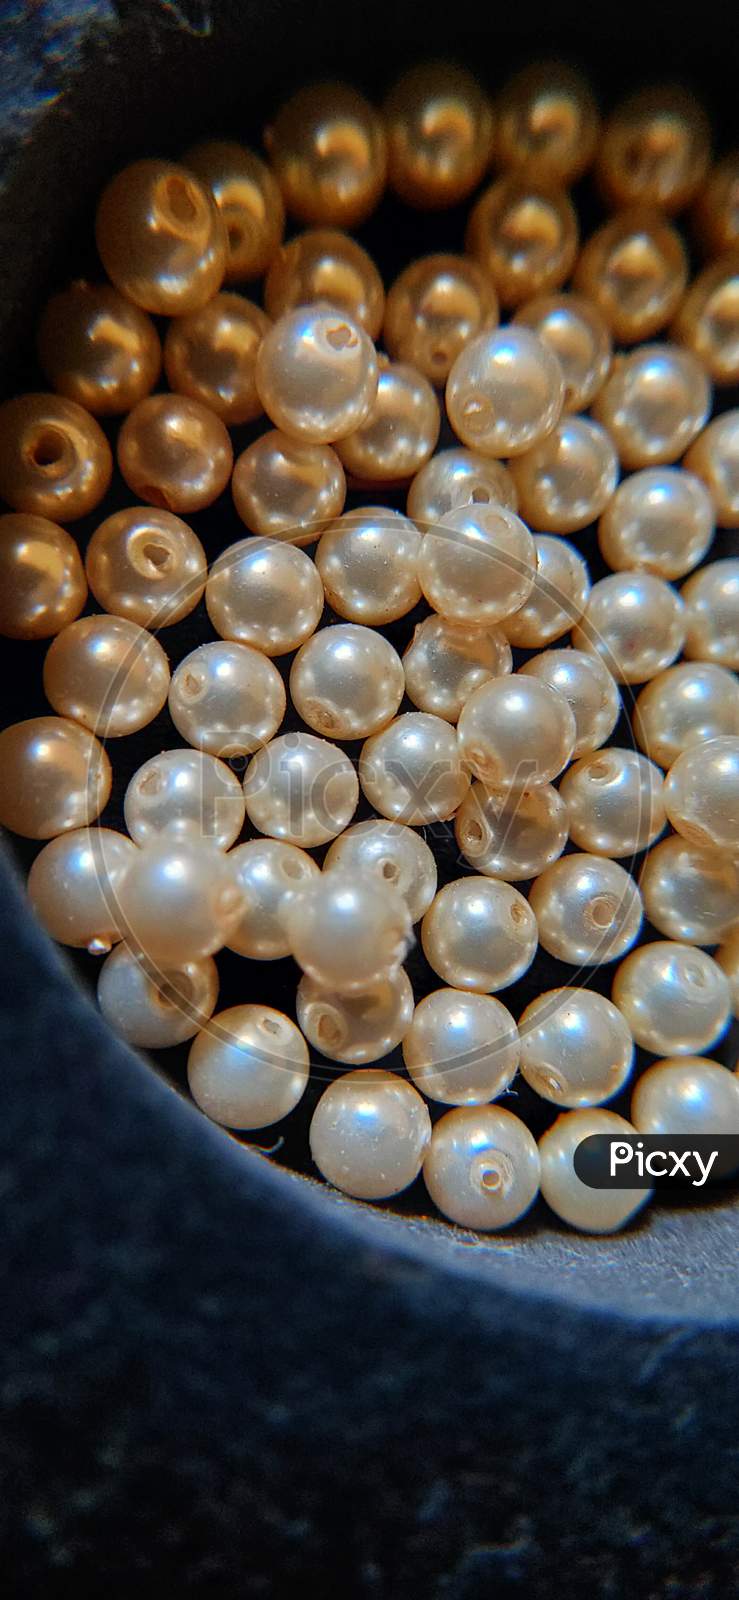 American pearls close up. Golden colour pearls on black background.